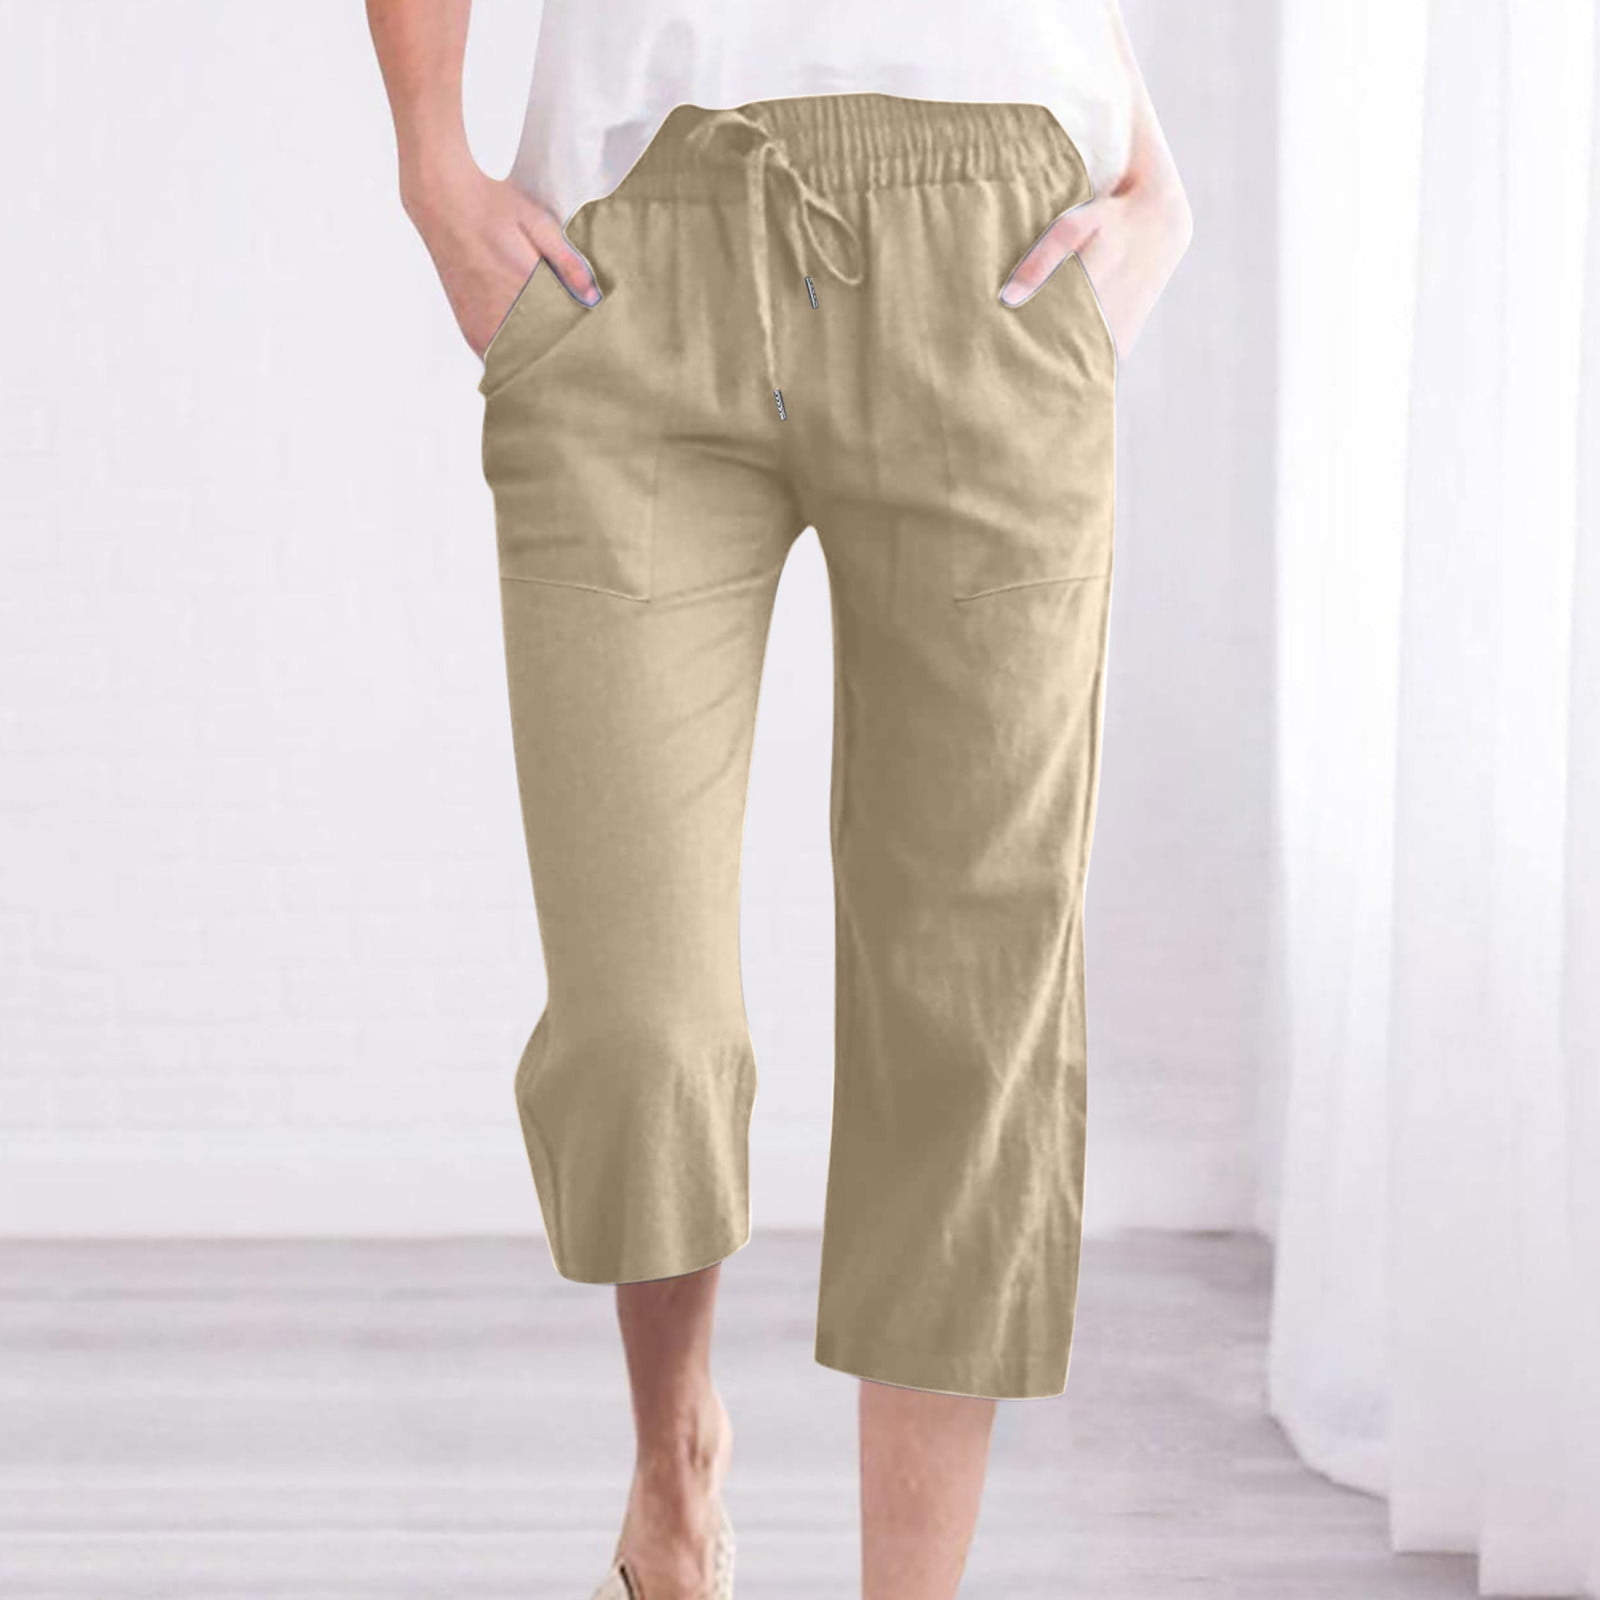 LADIES LINEN 3 QUARTER TROUSER WOMEN CROPPED 3/4 PANTS SUMMER RELAXED FIT  SHORTS